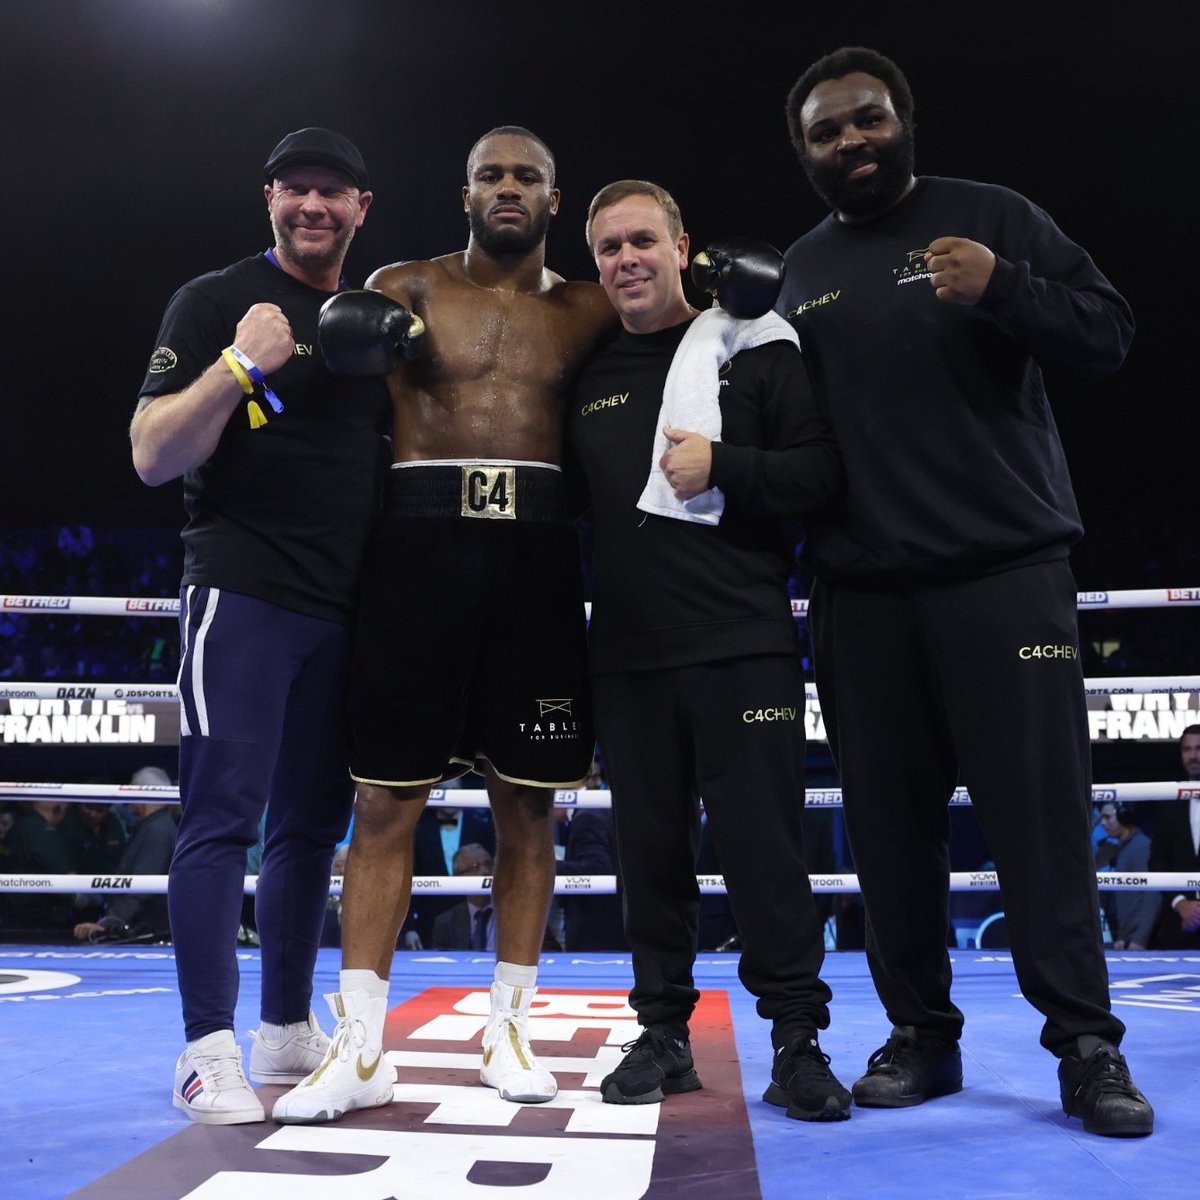 Shoutout to the team behind the man. Legends in the game 👊

#TEAMC4 #C4CHEV #WhyteFranklin #MatchroomBoxing #DAZN